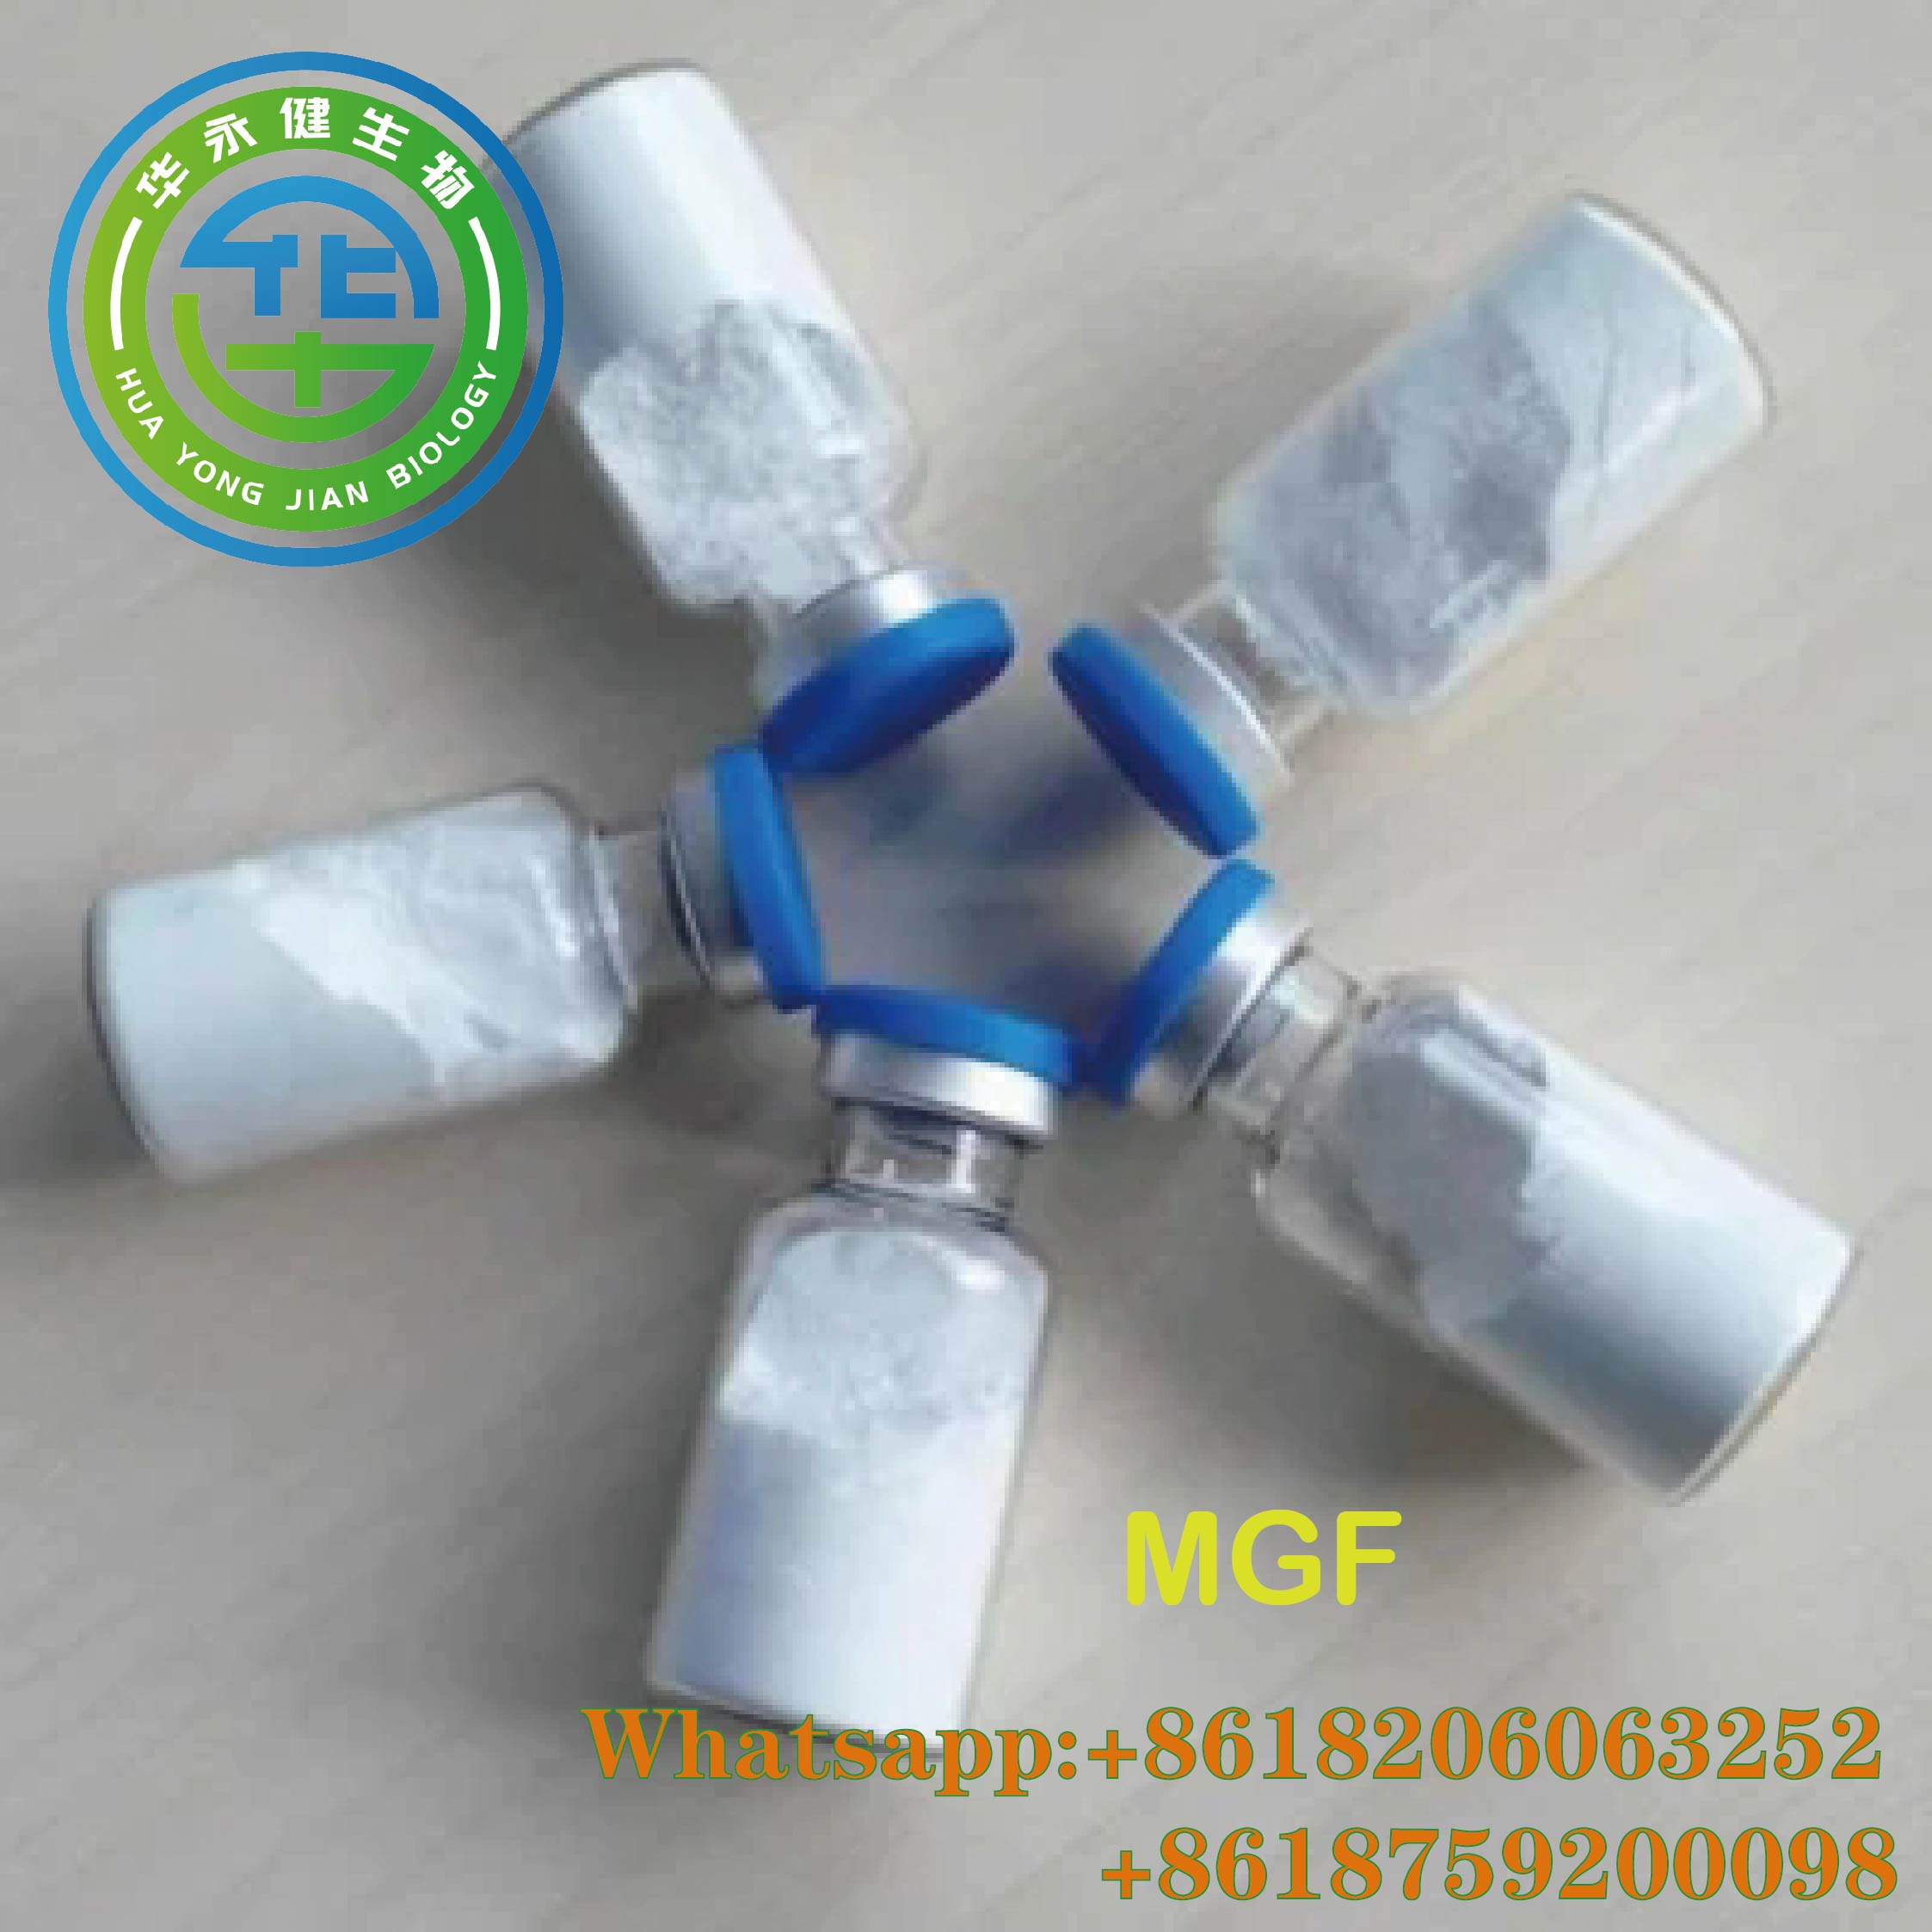 Hot Sale Real Mgf High Purity Human Growth Peptides  Gh Hormones CasNO.62031-54-3 